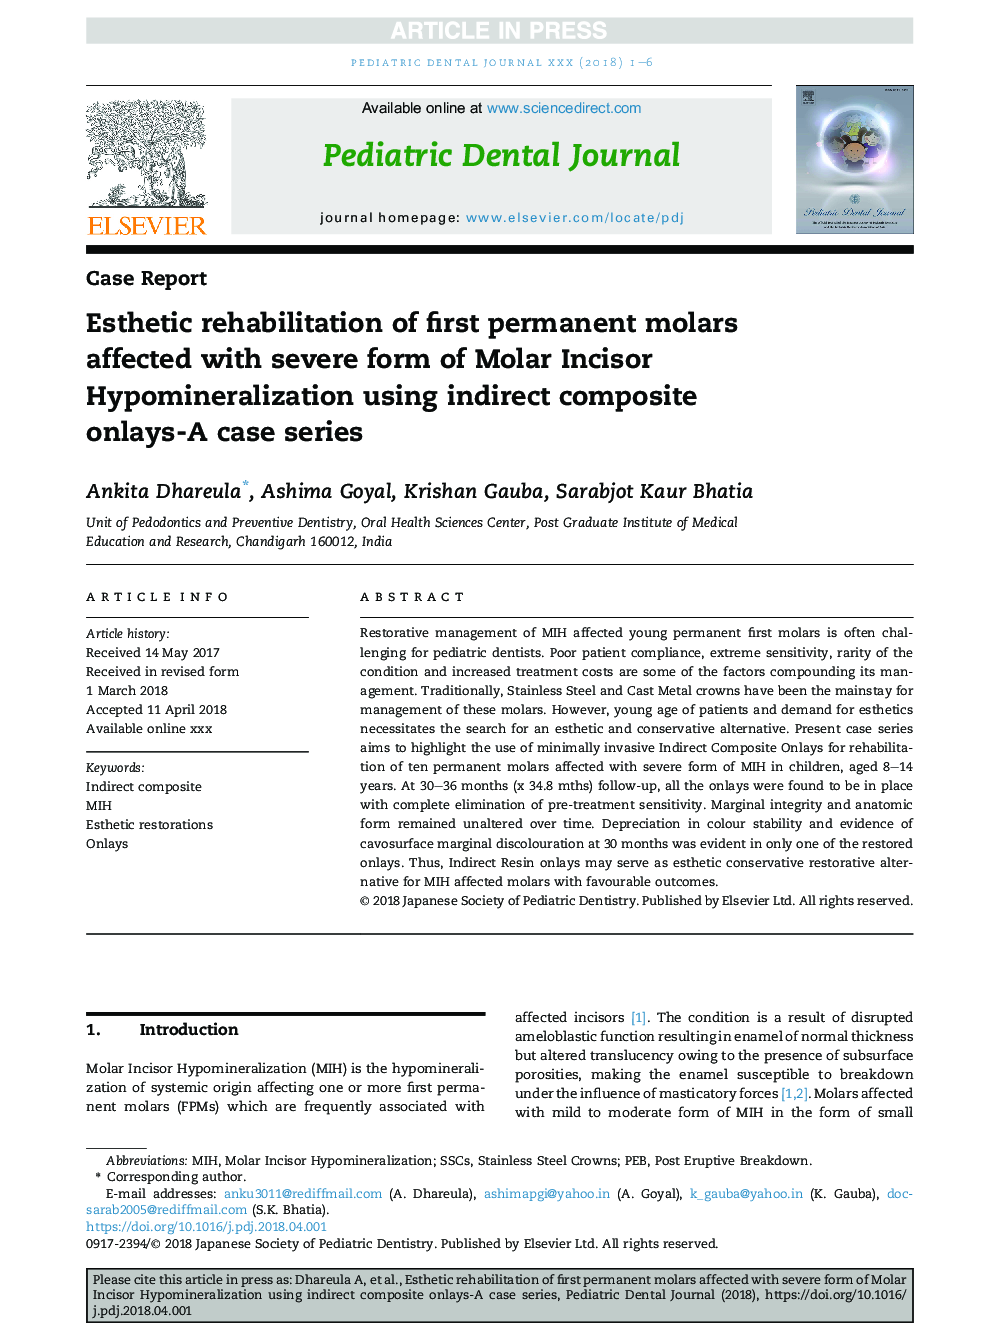 Esthetic rehabilitation of first permanent molars affected with severe form of Molar Incisor Hypomineralization using indirect composite onlays-A case series